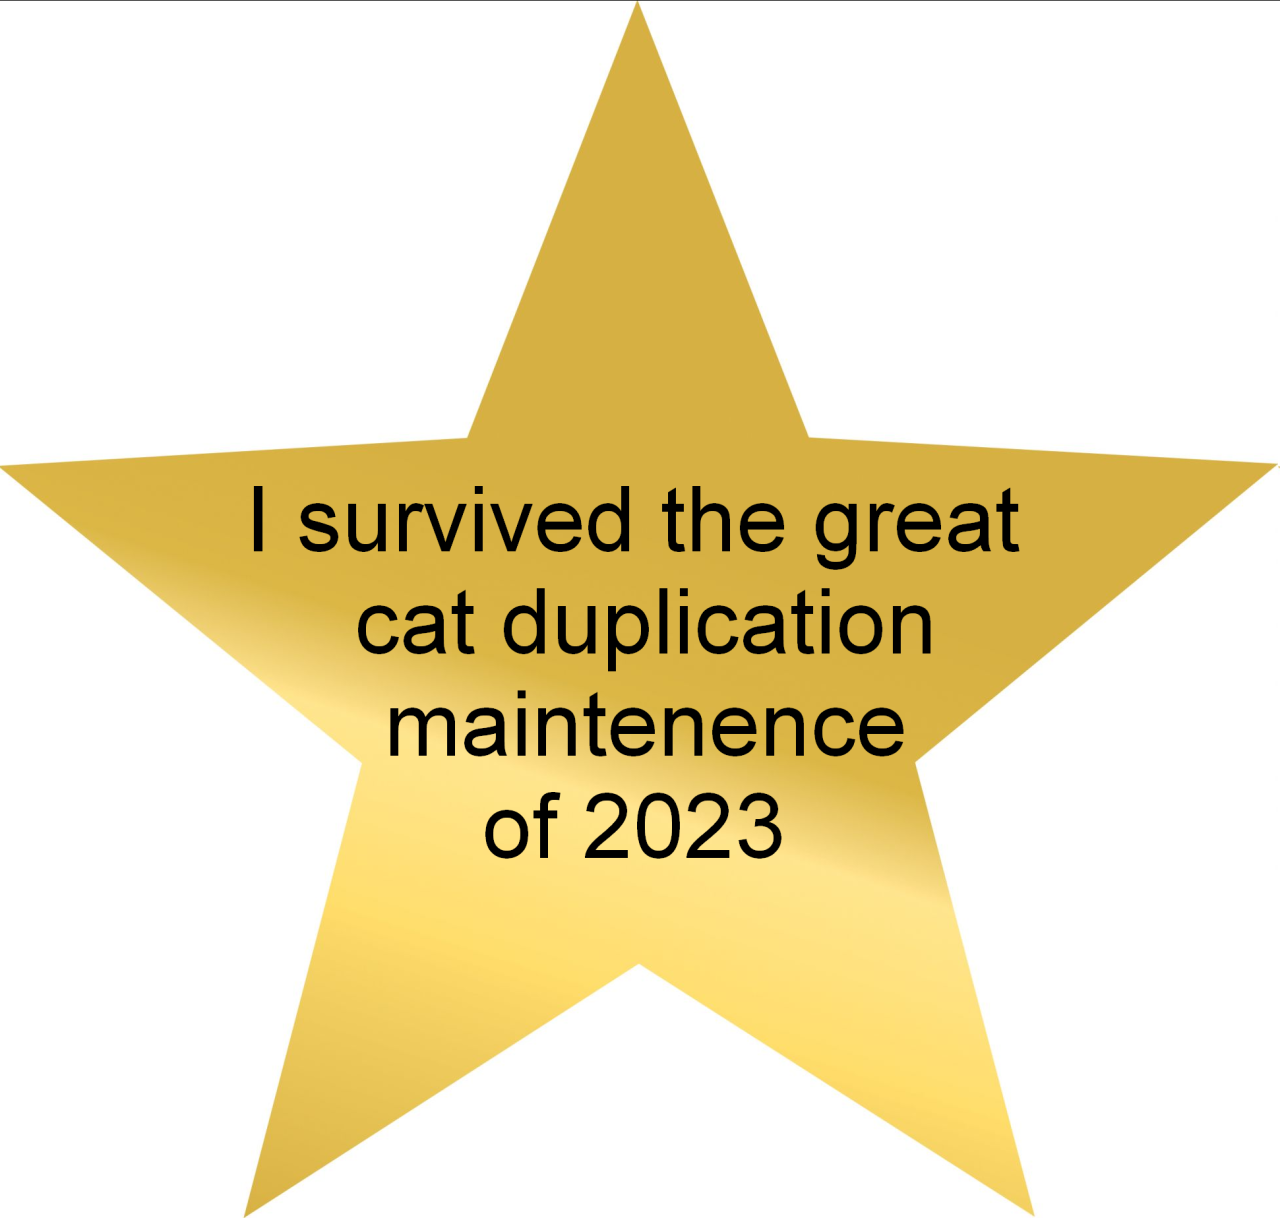 supposed to be a star that says “I survived the great cat duplication maintenance of 2023